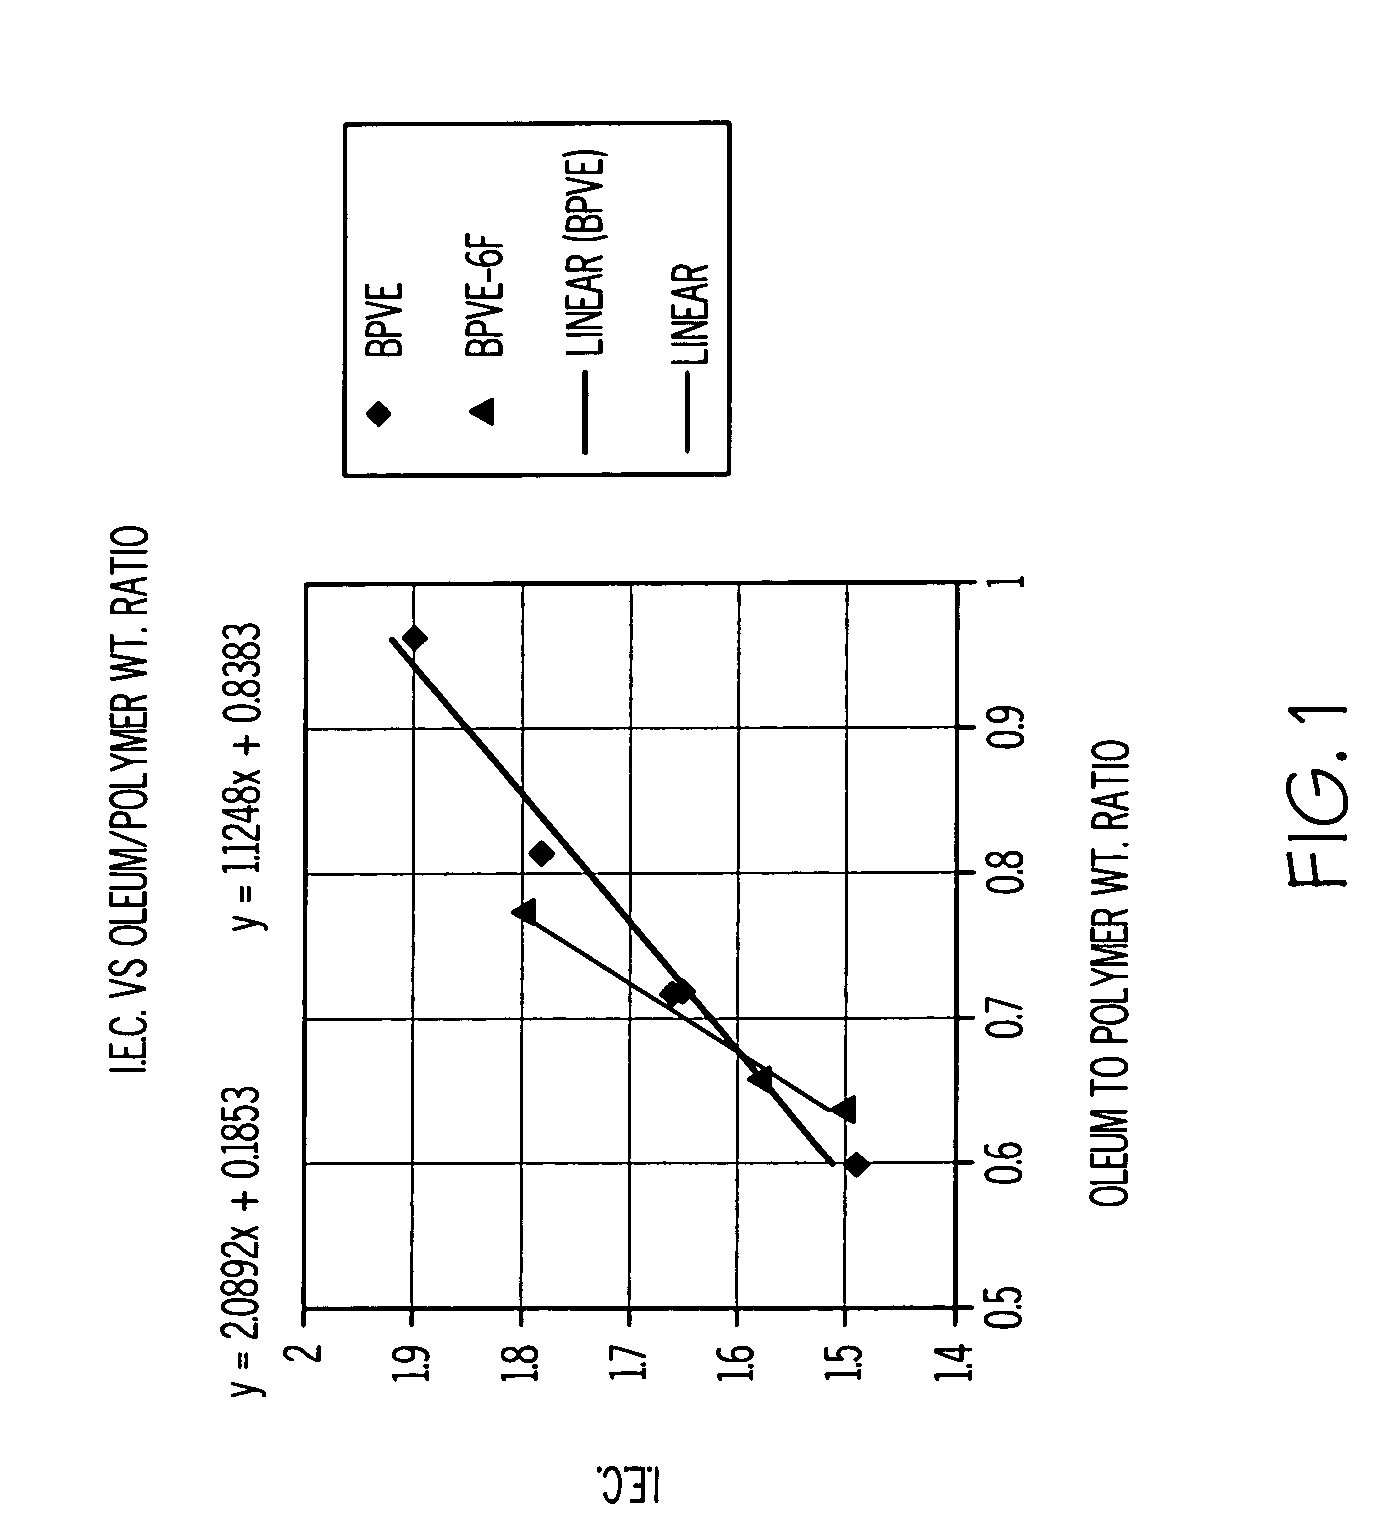 Sulfonated-perfluorocyclobutane polyelectrolyte membranes for fuel cells